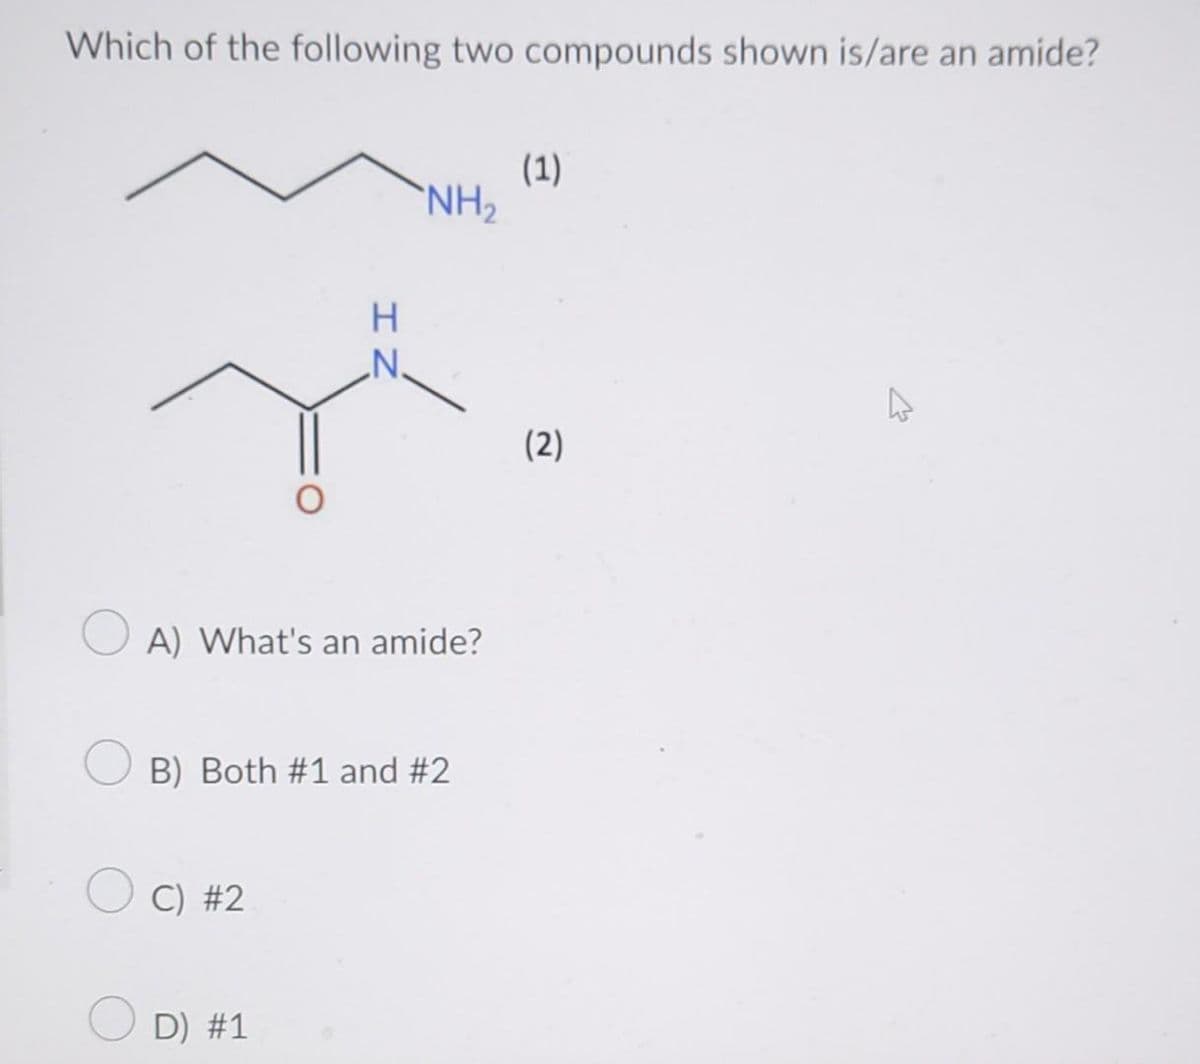 Which of the following two compounds shown is/are an amide?
A) What's an amide?
NH₂
B) Both #1 and #2
C) #2
D) #1
(1)
(2)